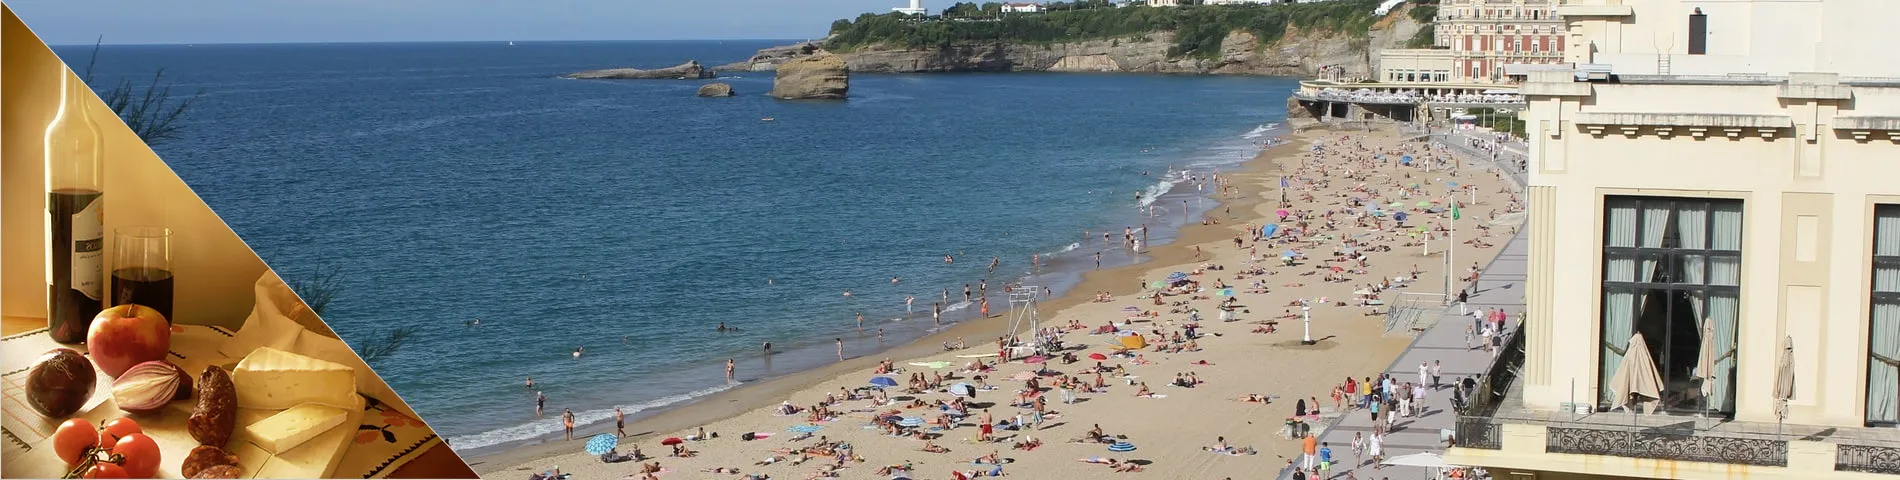 Biarritz - French & Culture